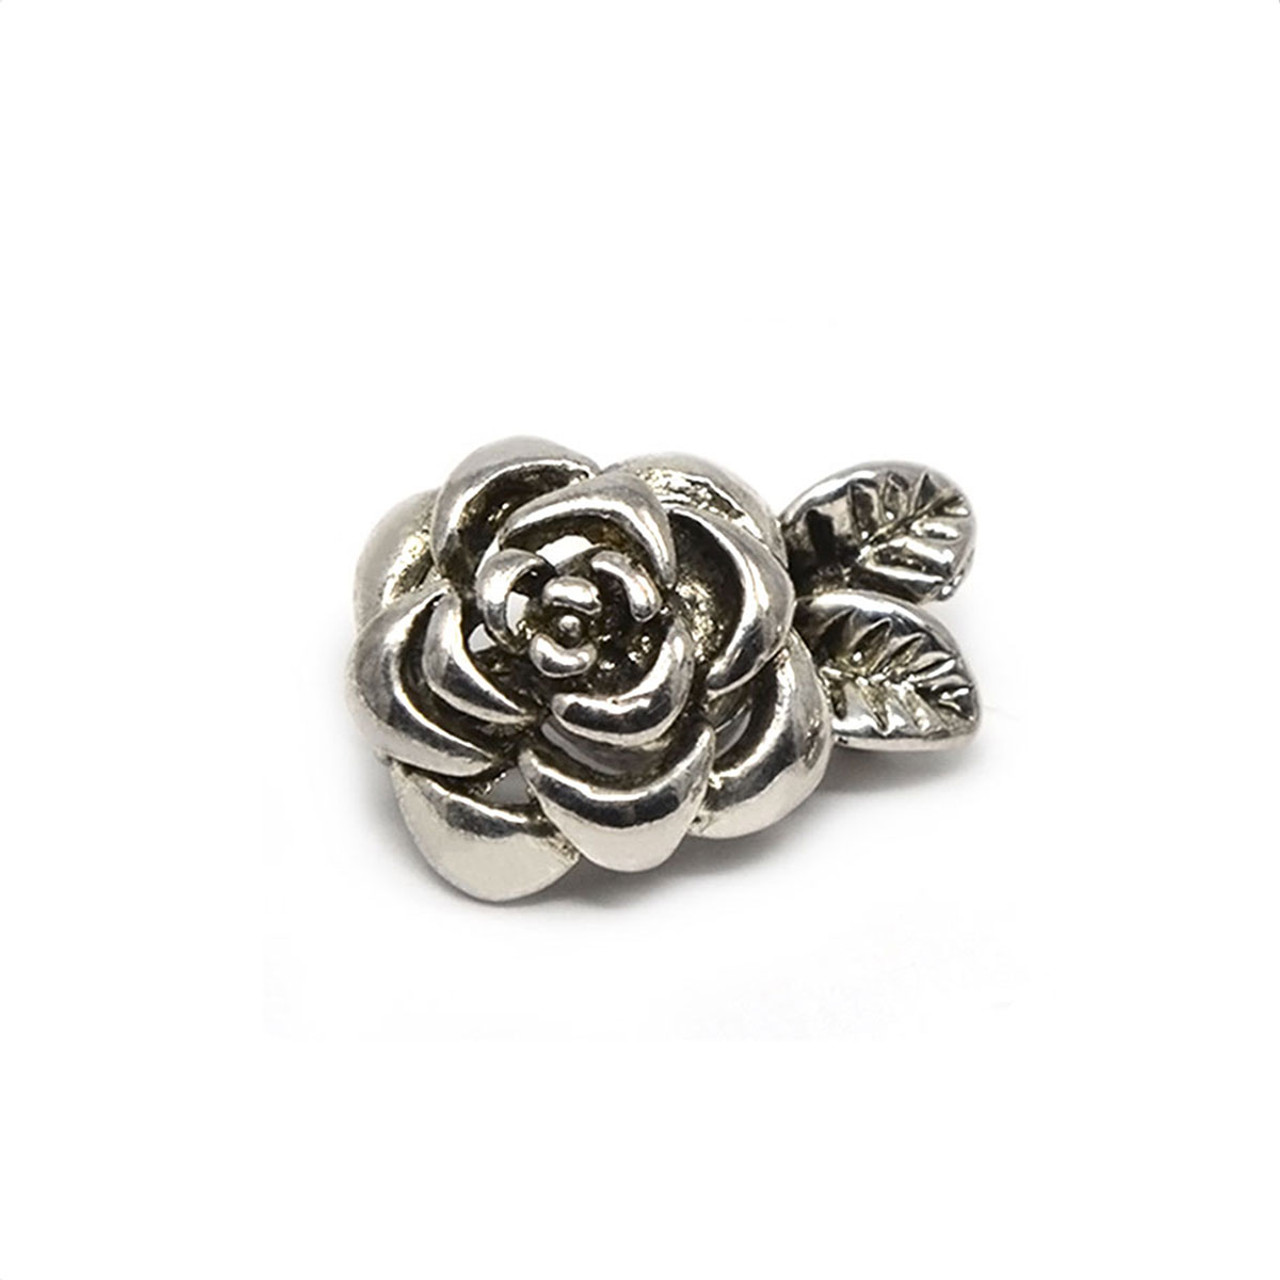 <img src="Magnetic Bracelet Clasp Silver Colored Rose NeodymiumMagnetic Bracelet Clasp.png" alt=" magnetic jewelry clasps  magnetic clasp jewelry silver">